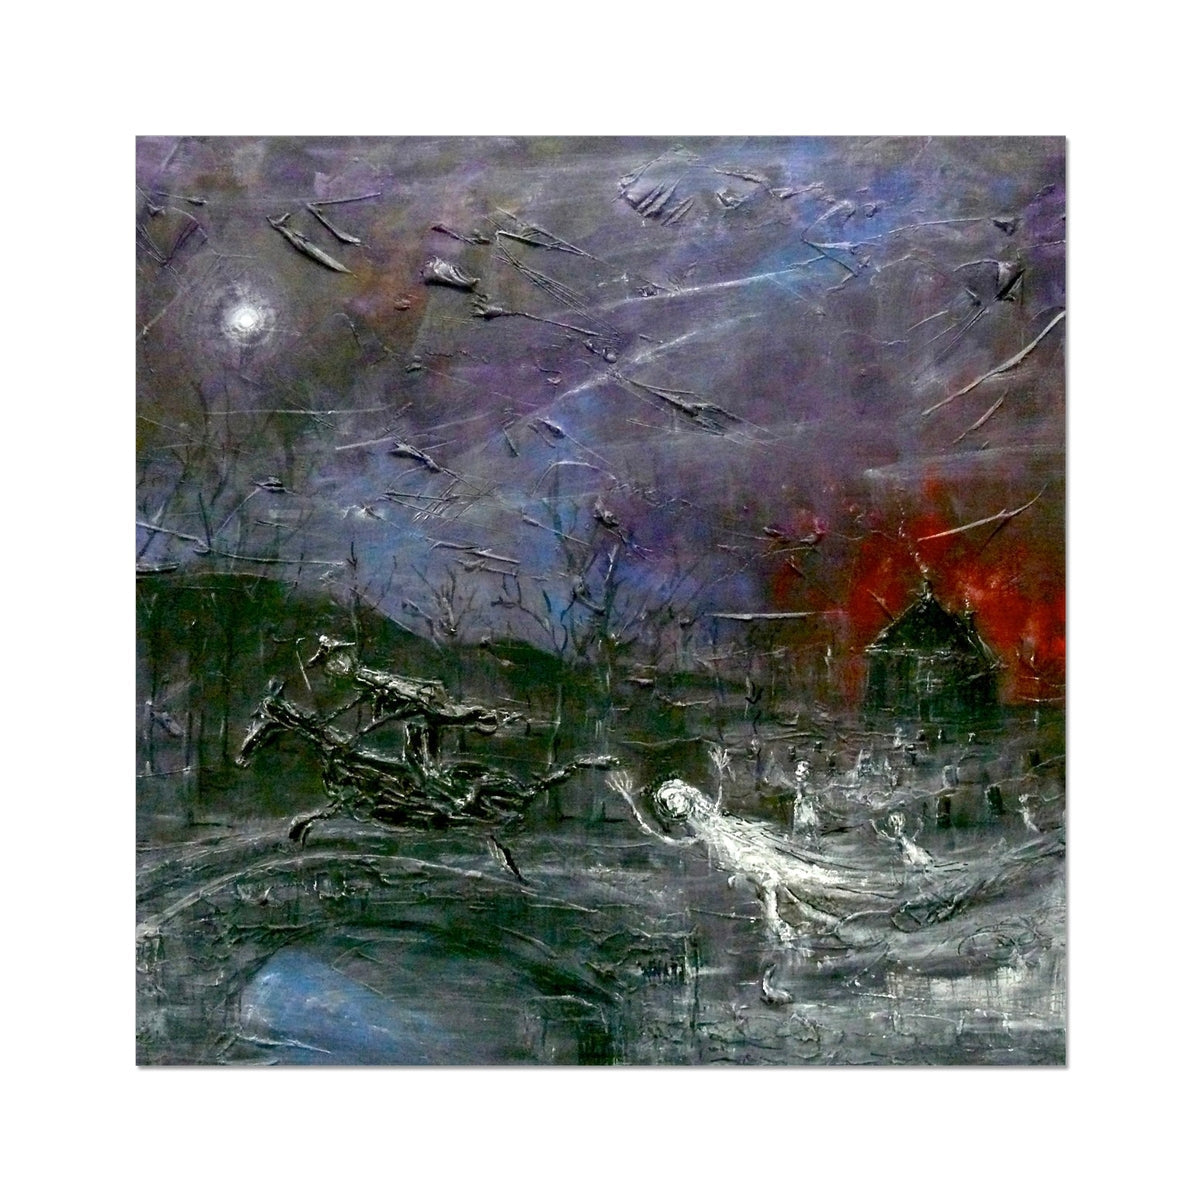 Tam O Shanter Painting | Artist Proof Collector Prints From Scotland-Artist Proof Collector Prints-Abstract & Impressionistic Art Gallery-20"x20"-Paintings, Prints, Homeware, Art Gifts From Scotland By Scottish Artist Kevin Hunter